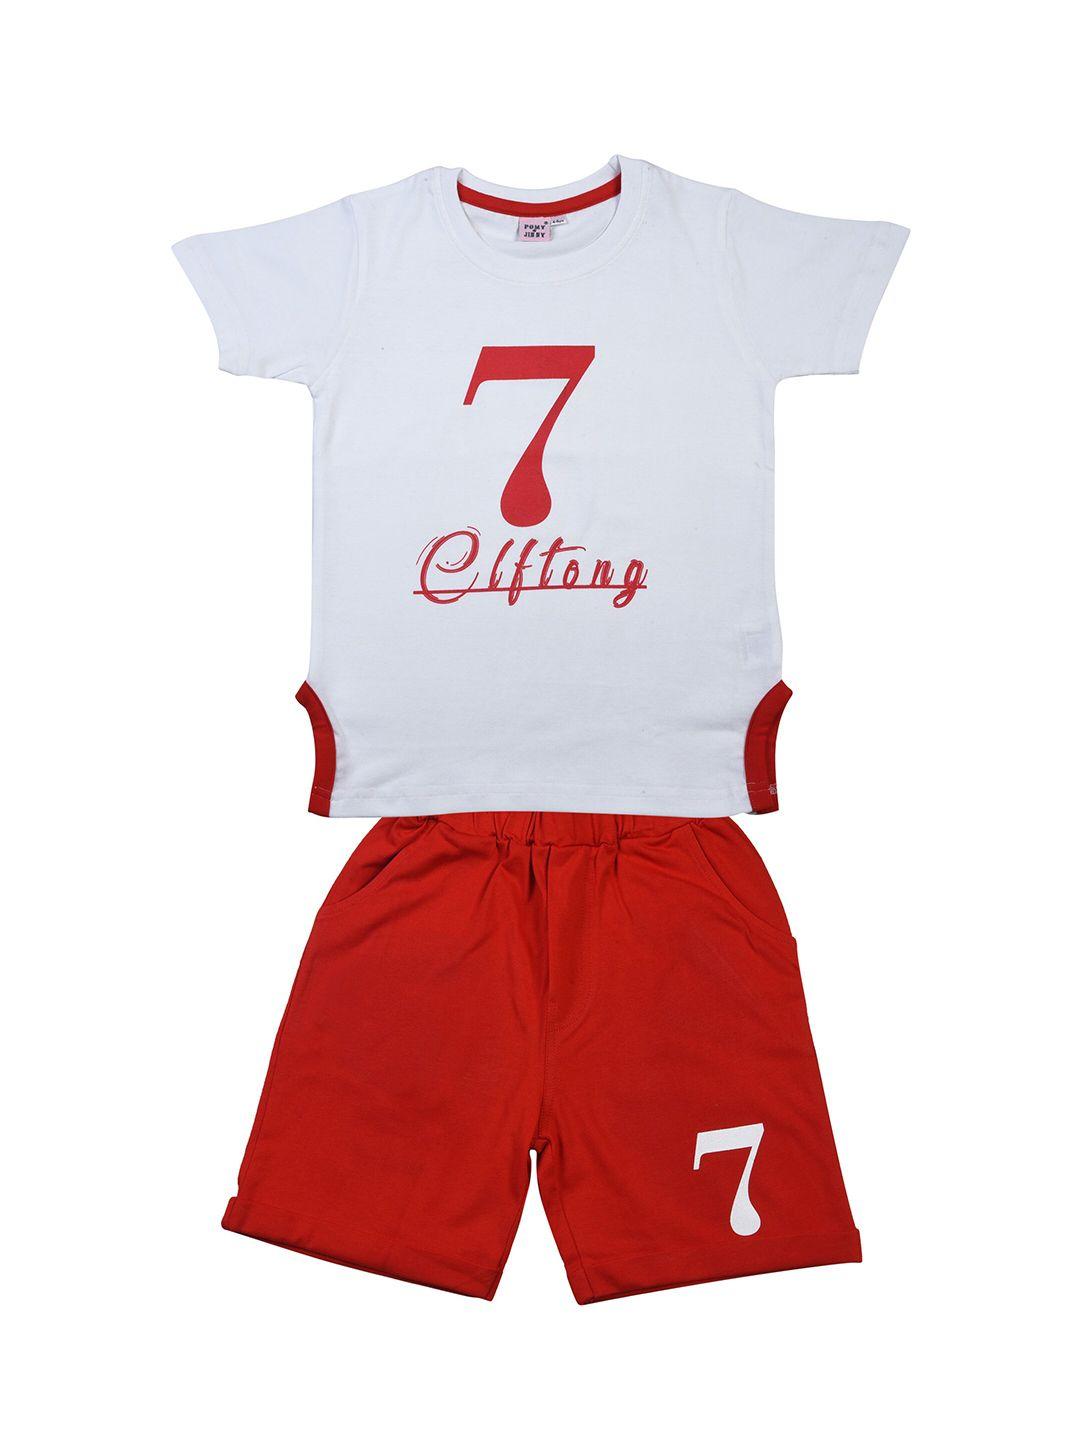 pomy-&-jinny-boys-white-&-red-printed-pure-cotton-casual-clothing-set